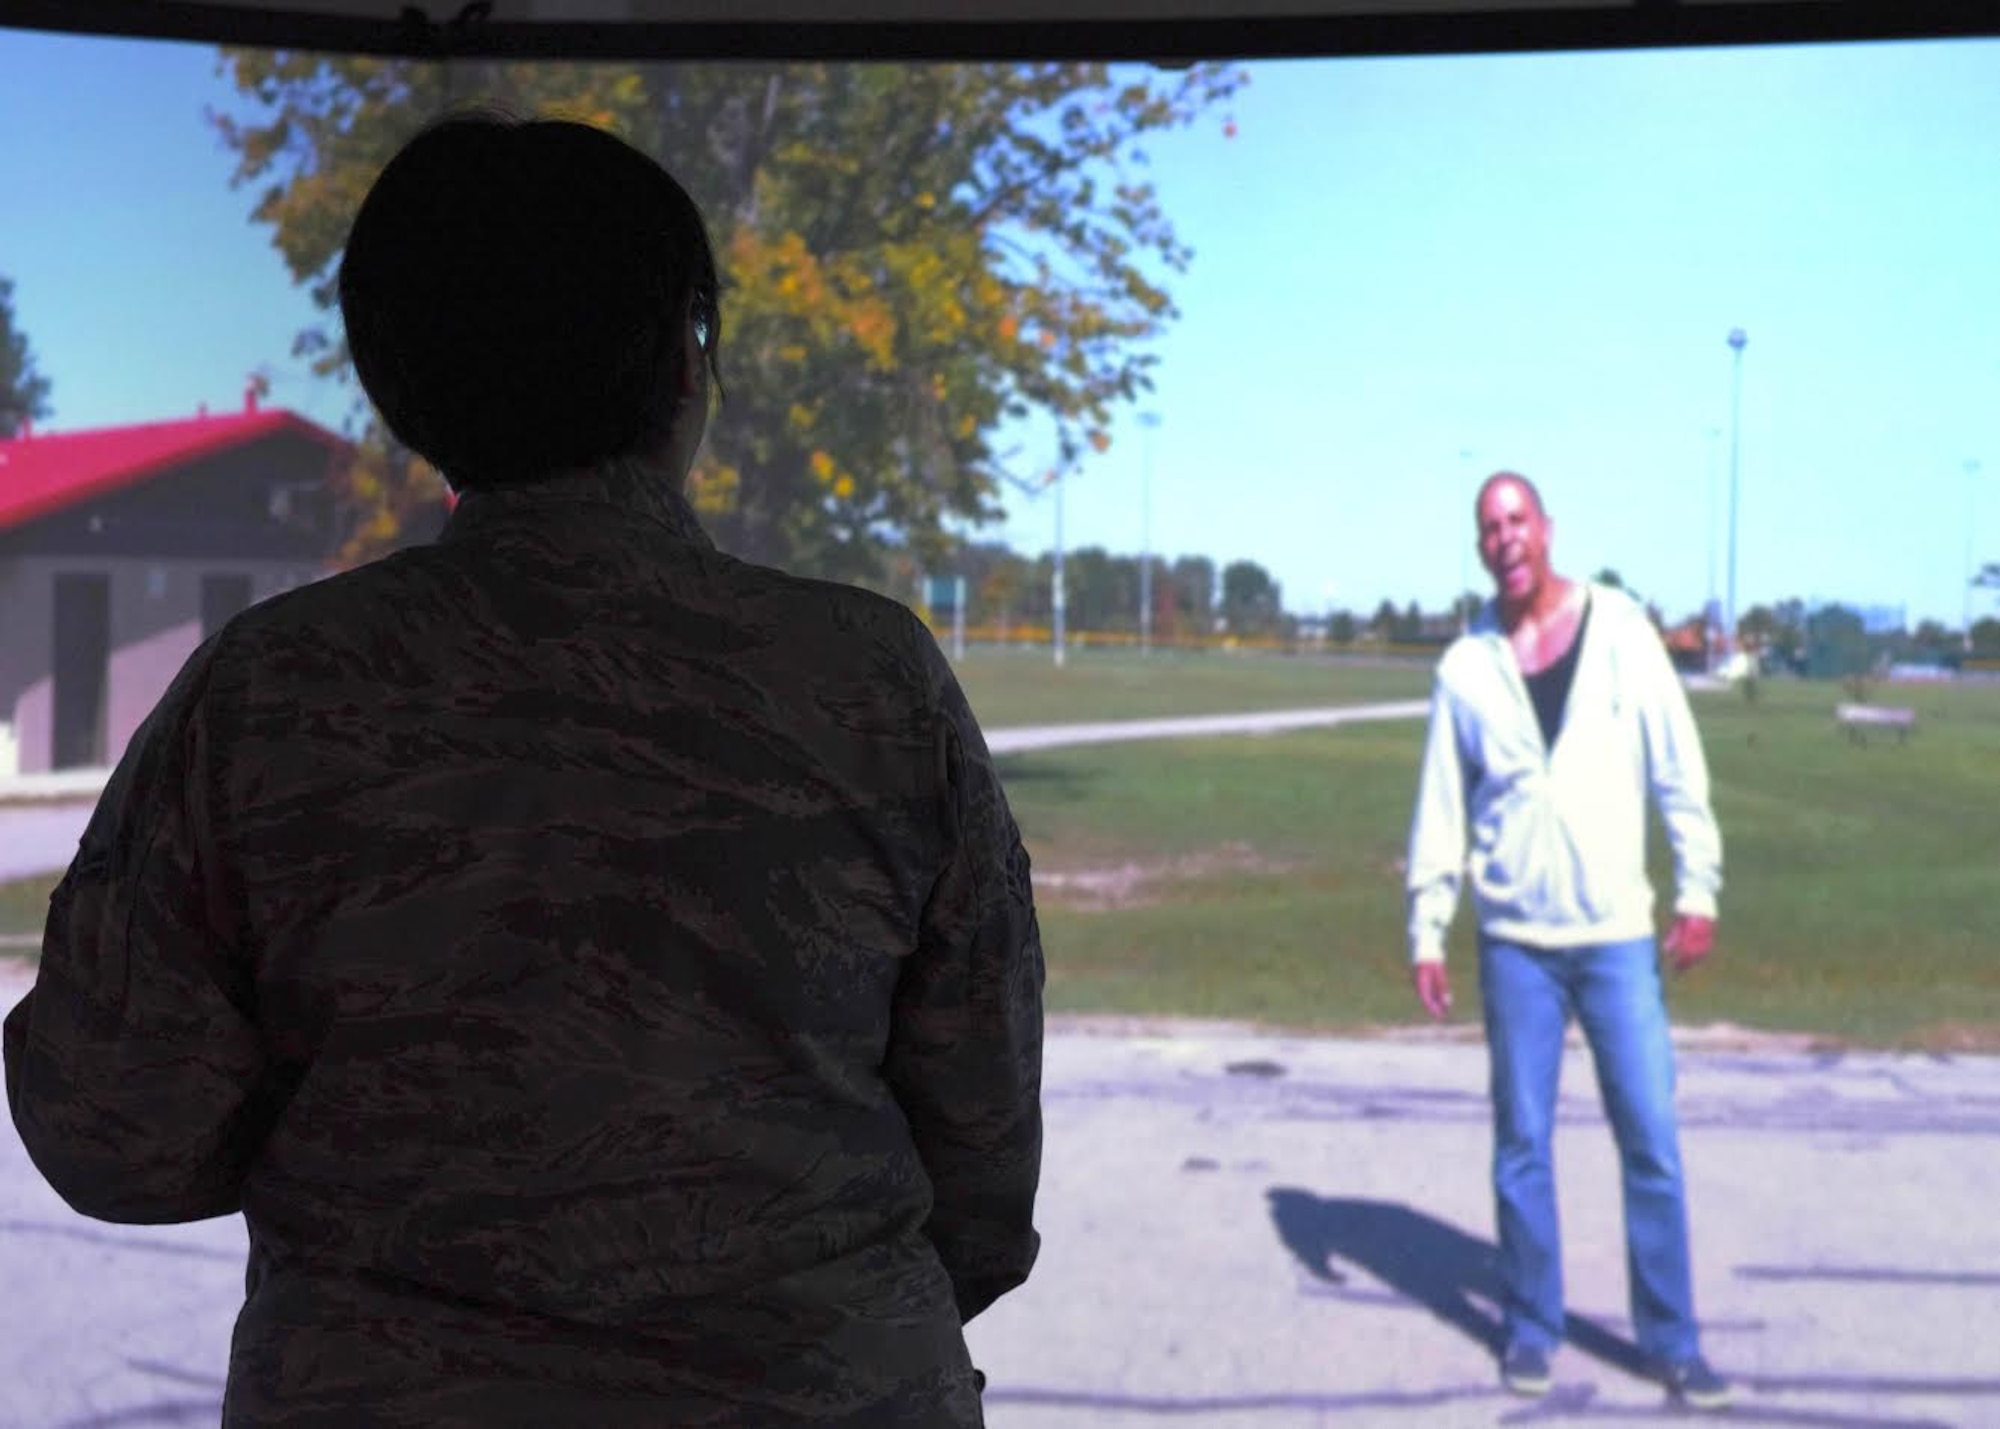 An Airman stands infront of a screen during a noise complaint simulation and tries to calm a male that is yelling.